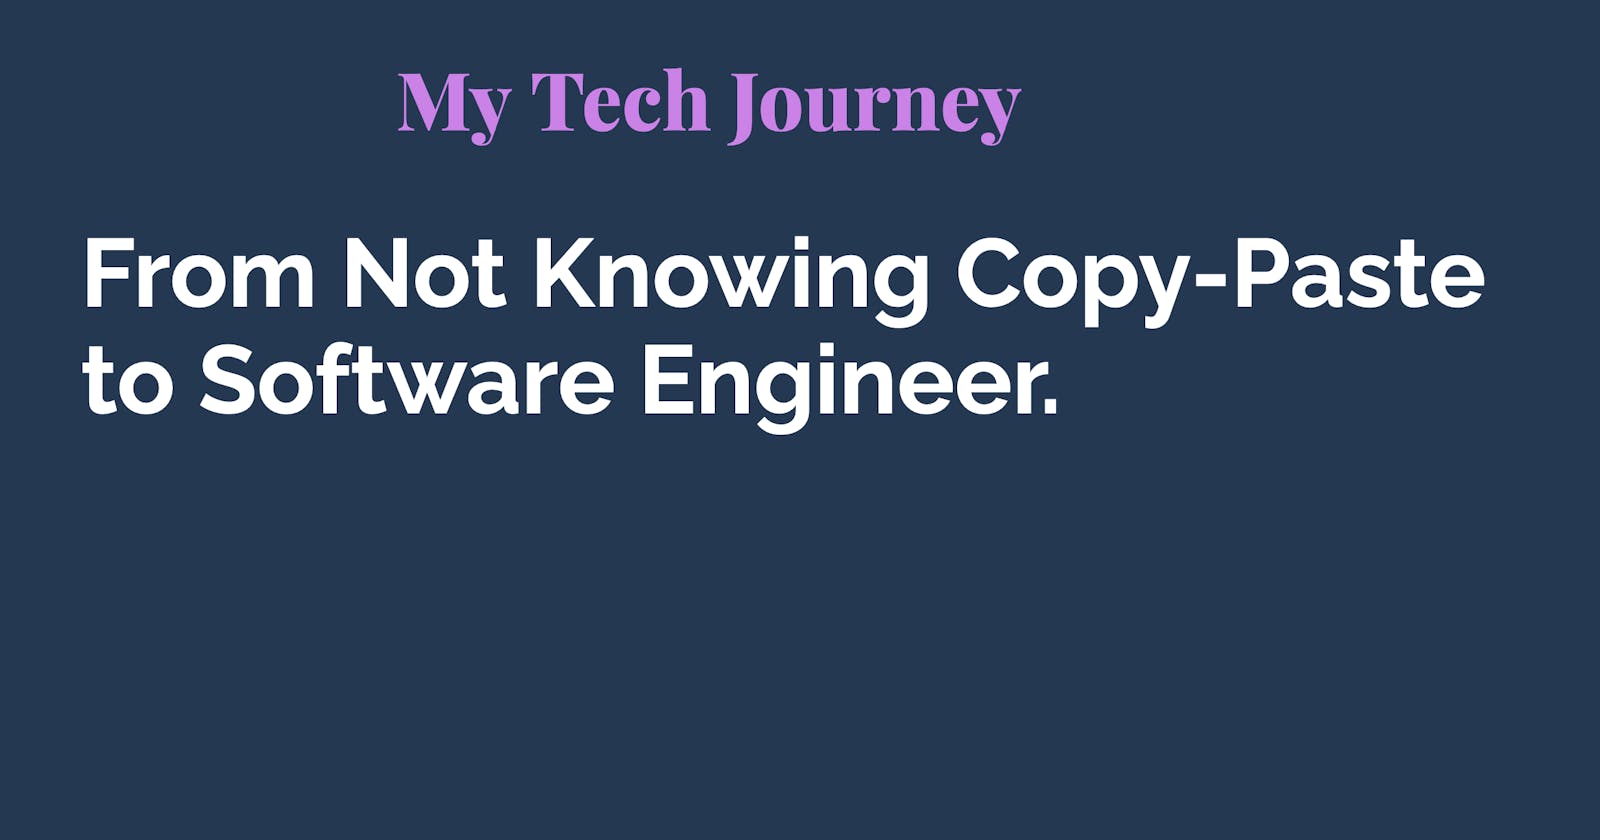 From Not Knowing Copy-Paste to Software Engineer.